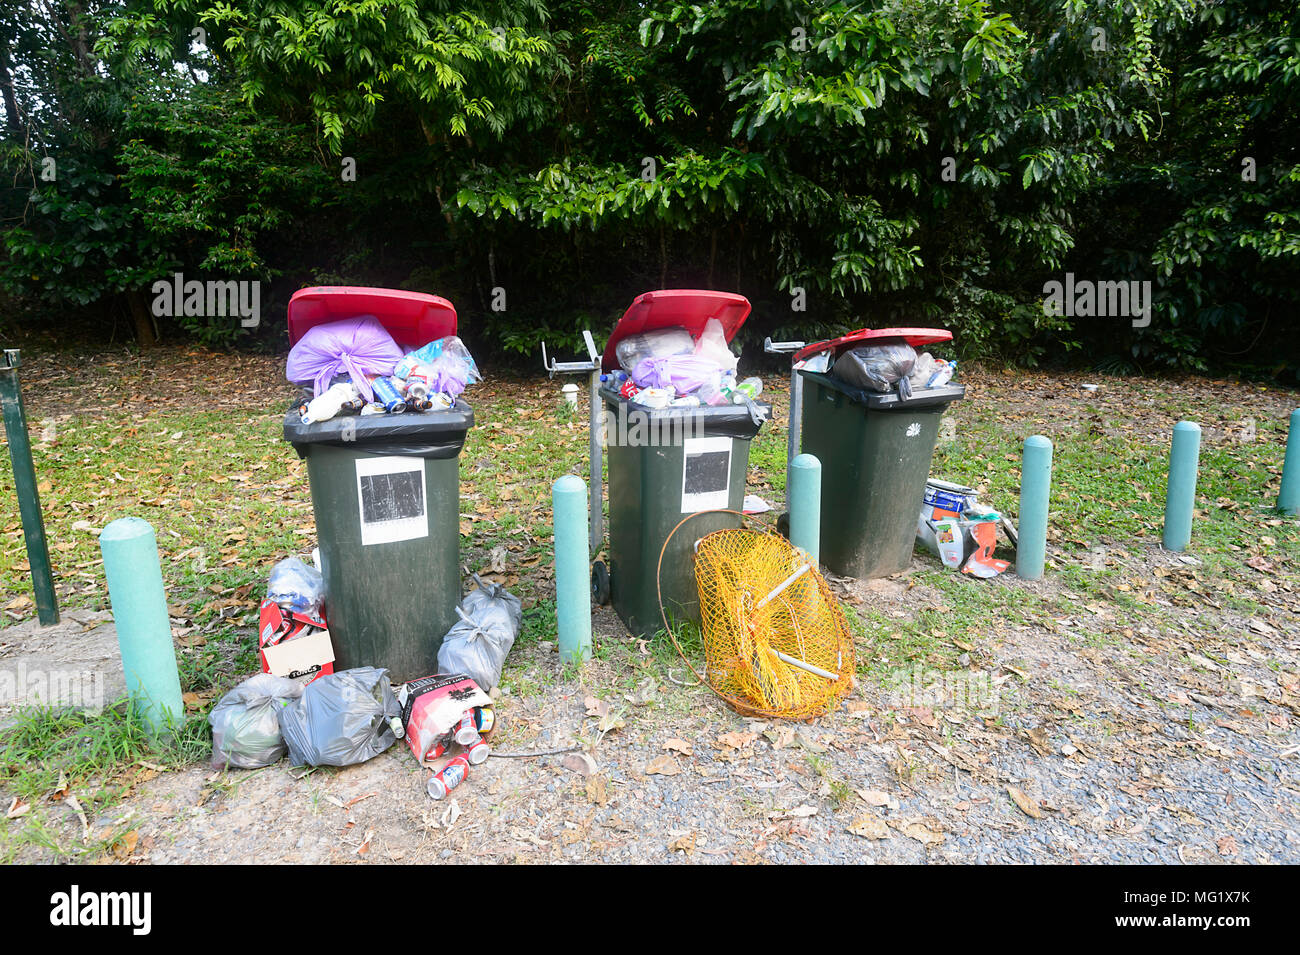 Rubbish overflowing from dustbins in a park in Queensland, Australia Stock Photo